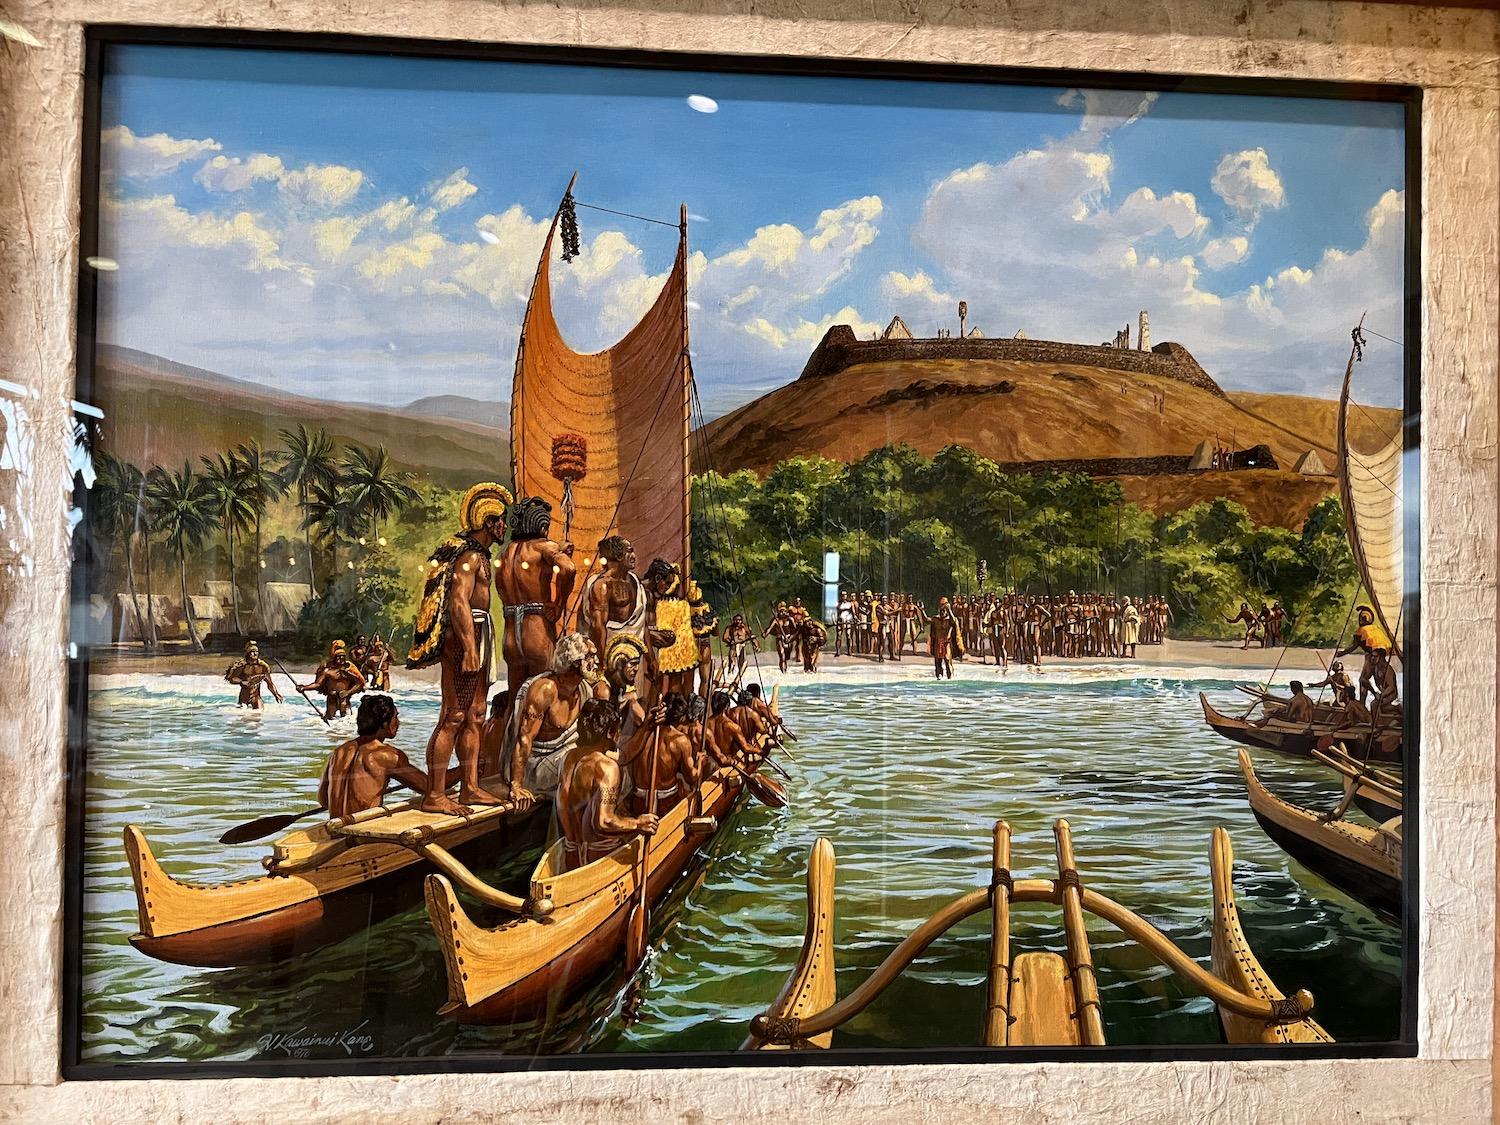 One of three paintings the NPS commissioned from Herb Kawainui Kāne, this is titled "A Ceremony at Puʻukoholā Heiau" and depicts a pivotal event in the history of the Hawaiian Islands.